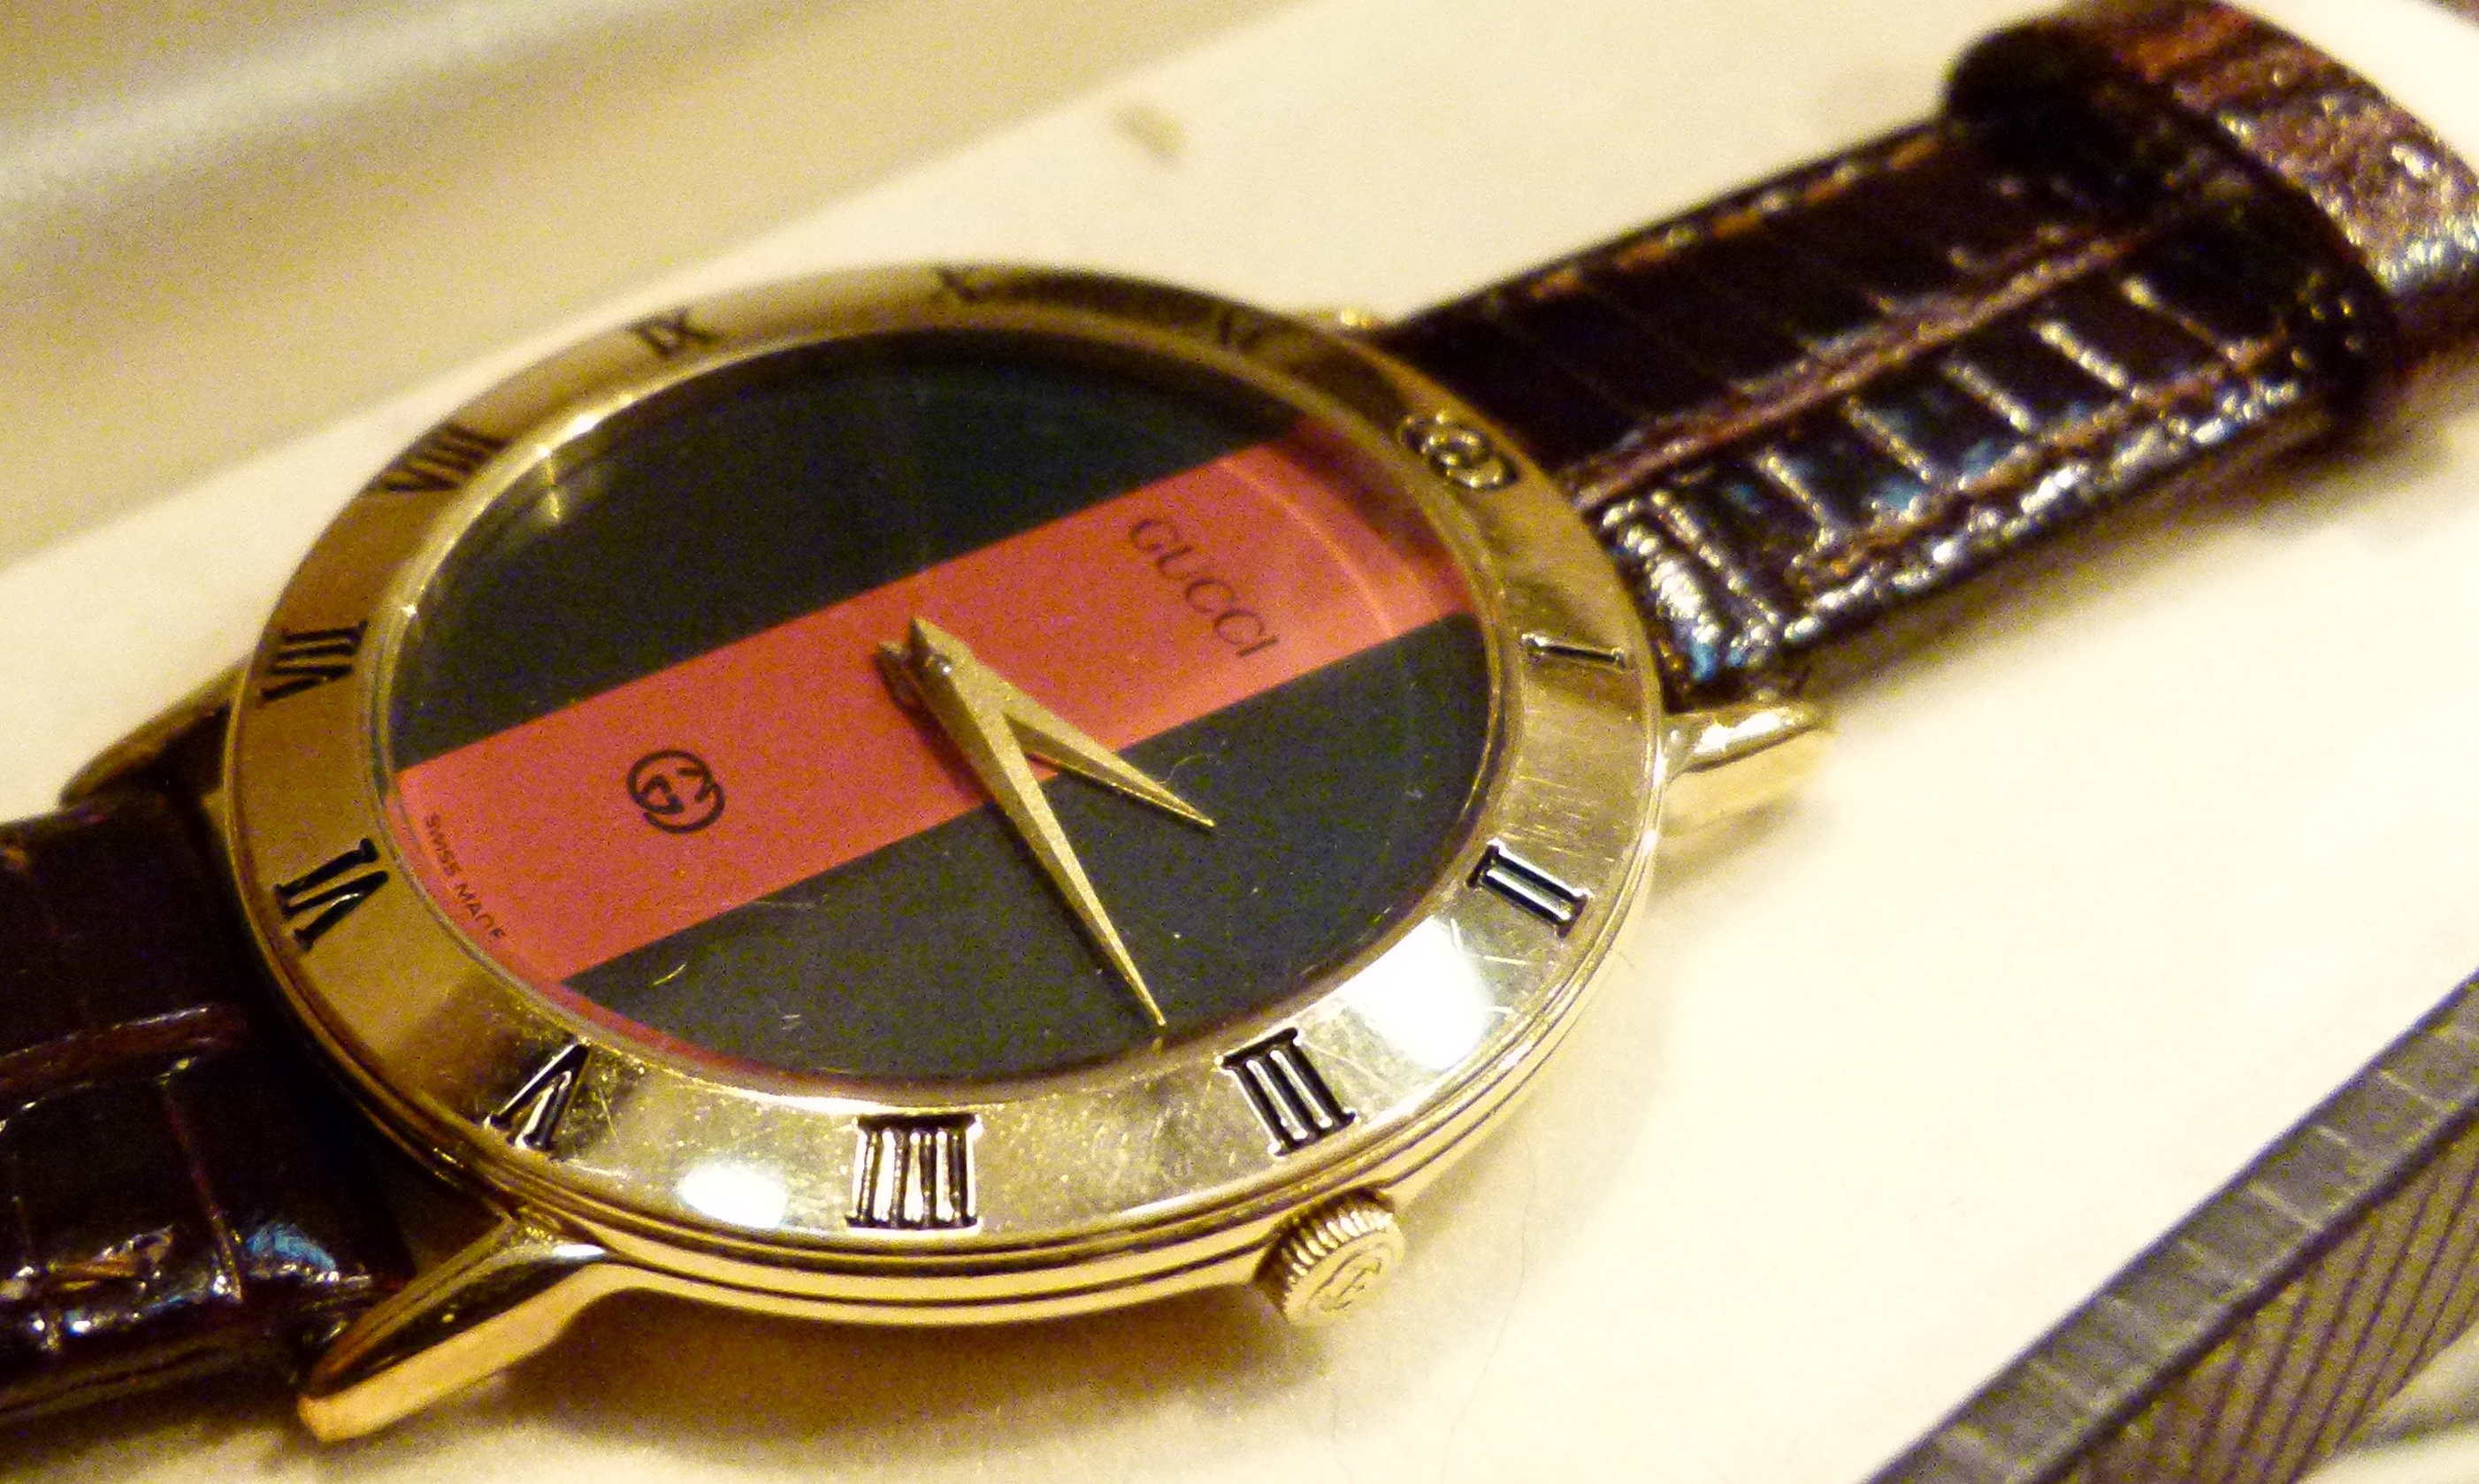 GENTS GUCCI WRISTWATCH. - Image 2 of 2